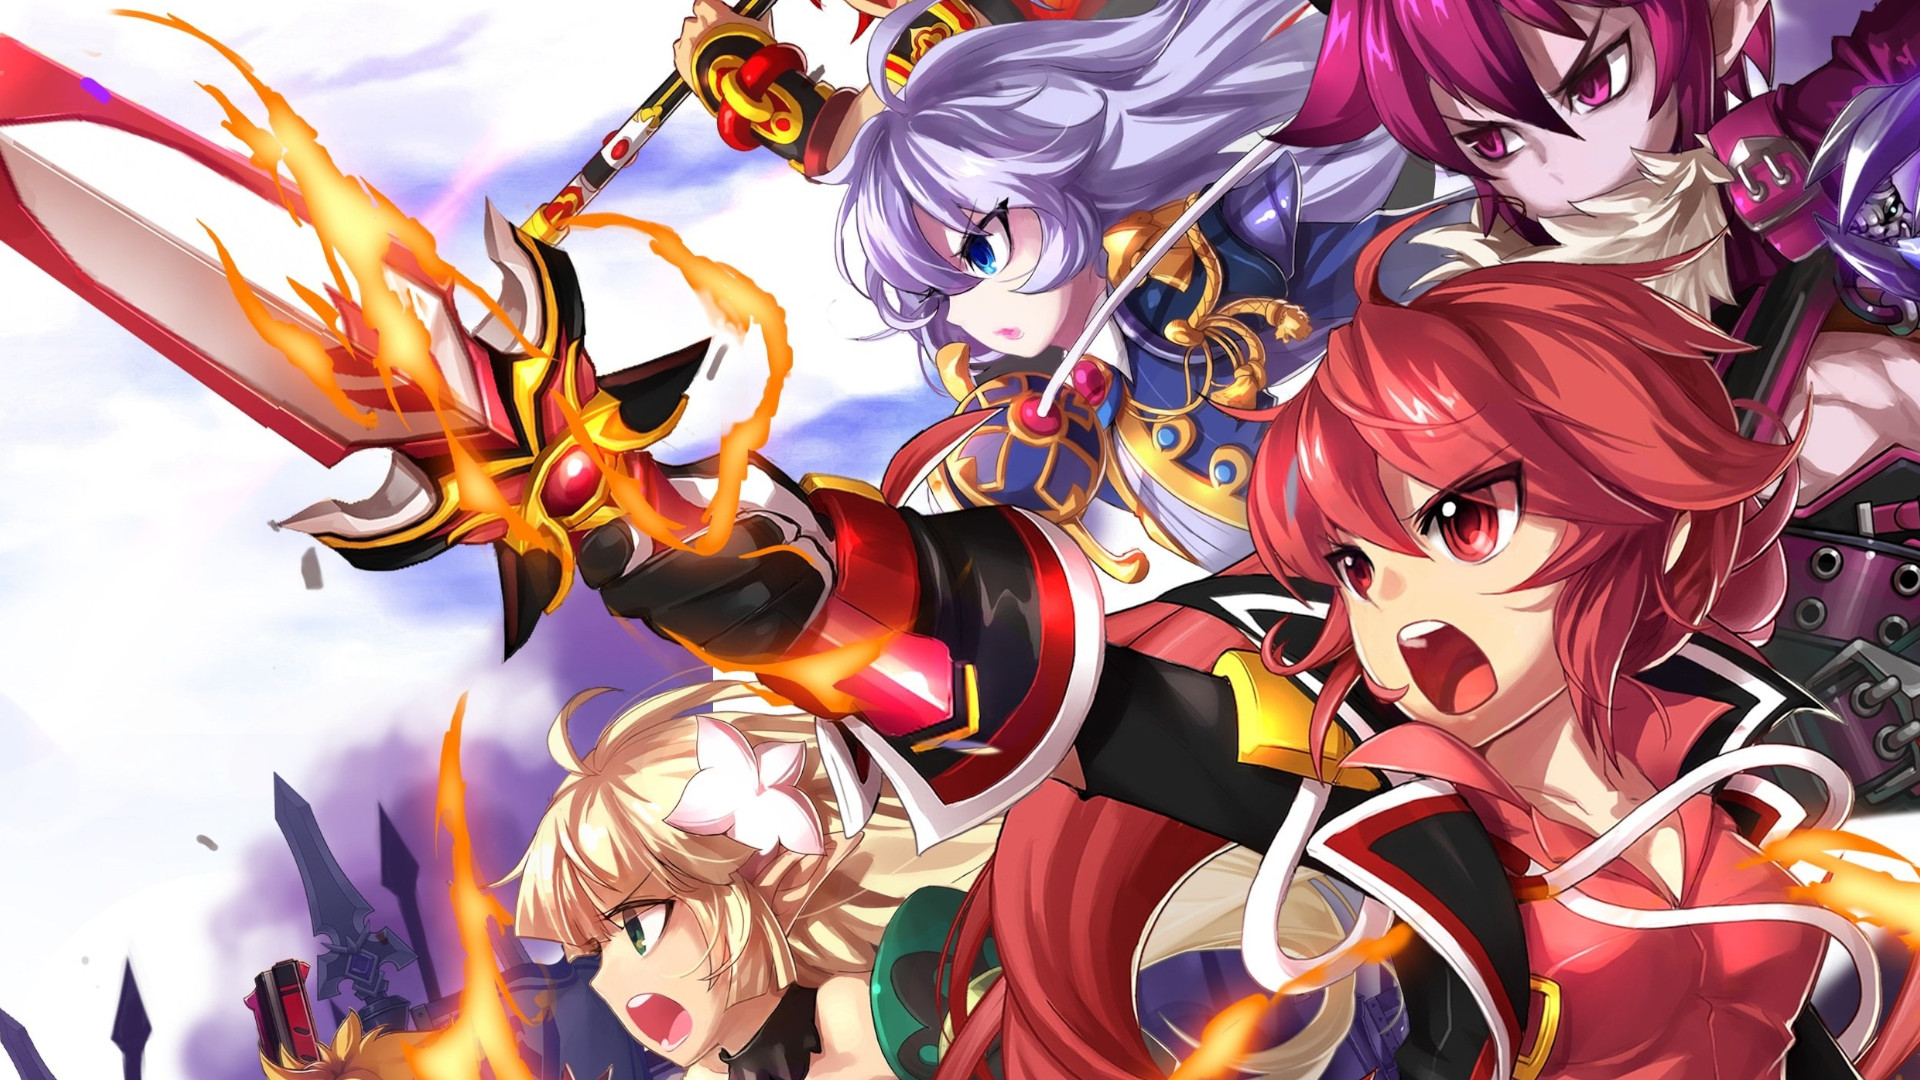 MMO Grand Chase returns and instantly reaches Steam’s top 10